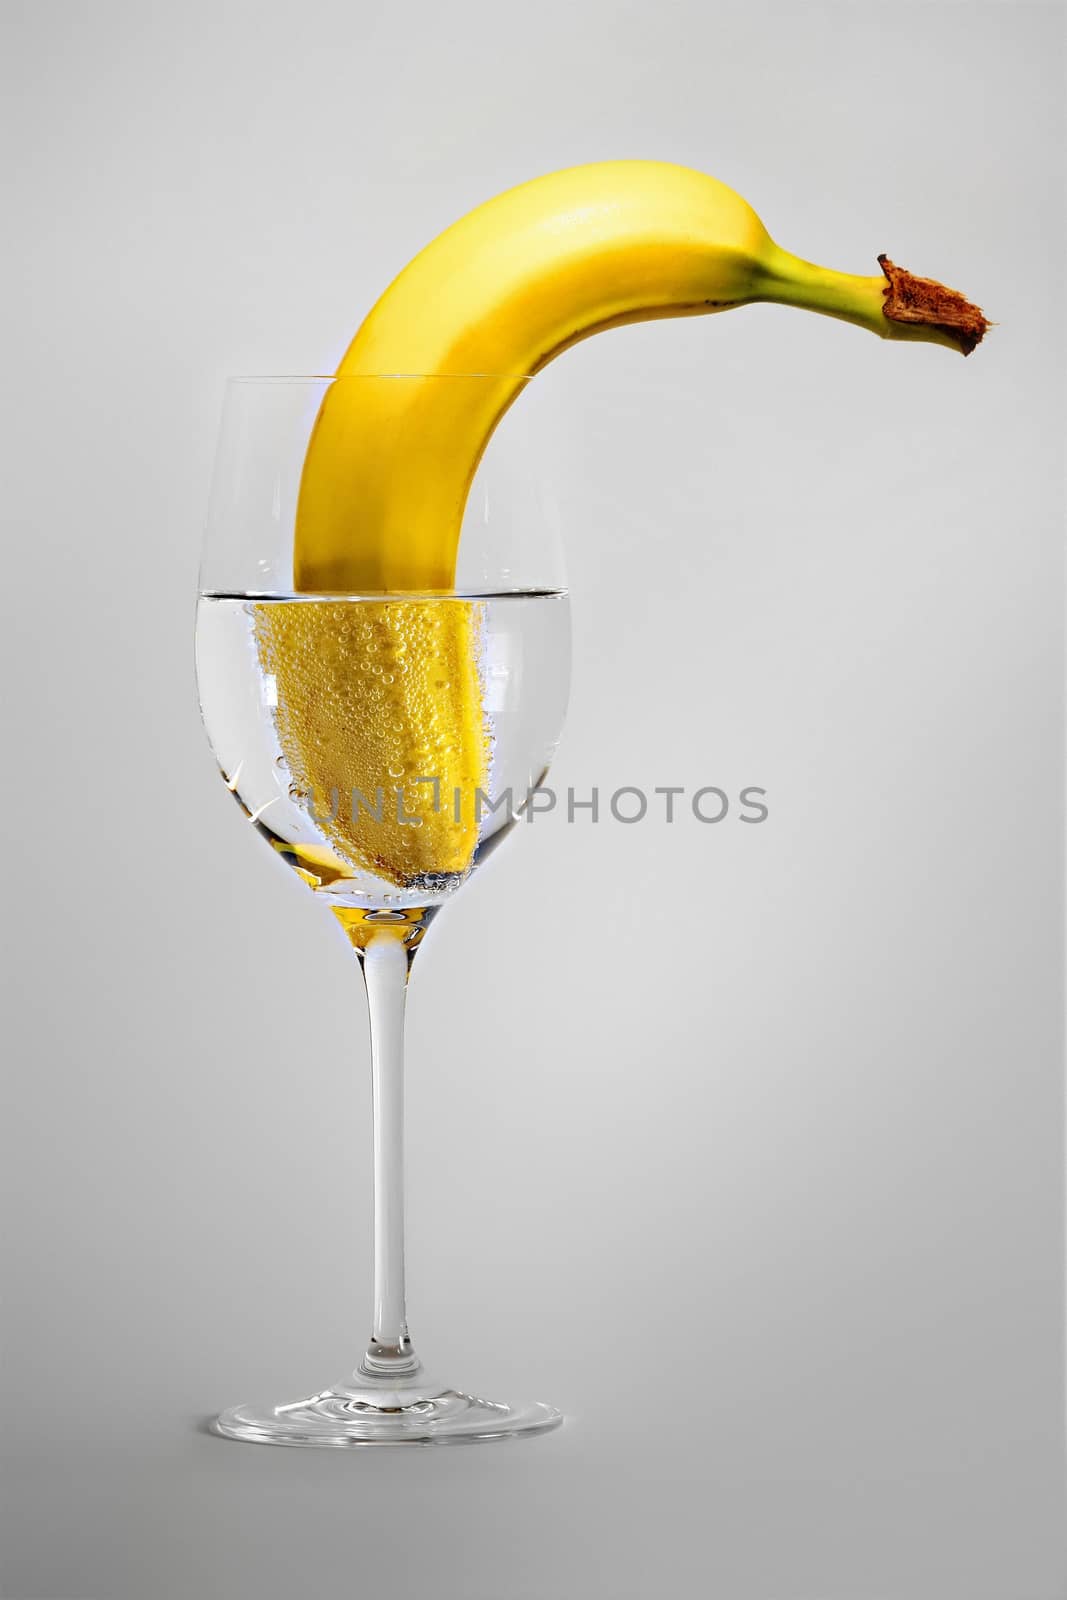 banana in a wineglass with water by magann